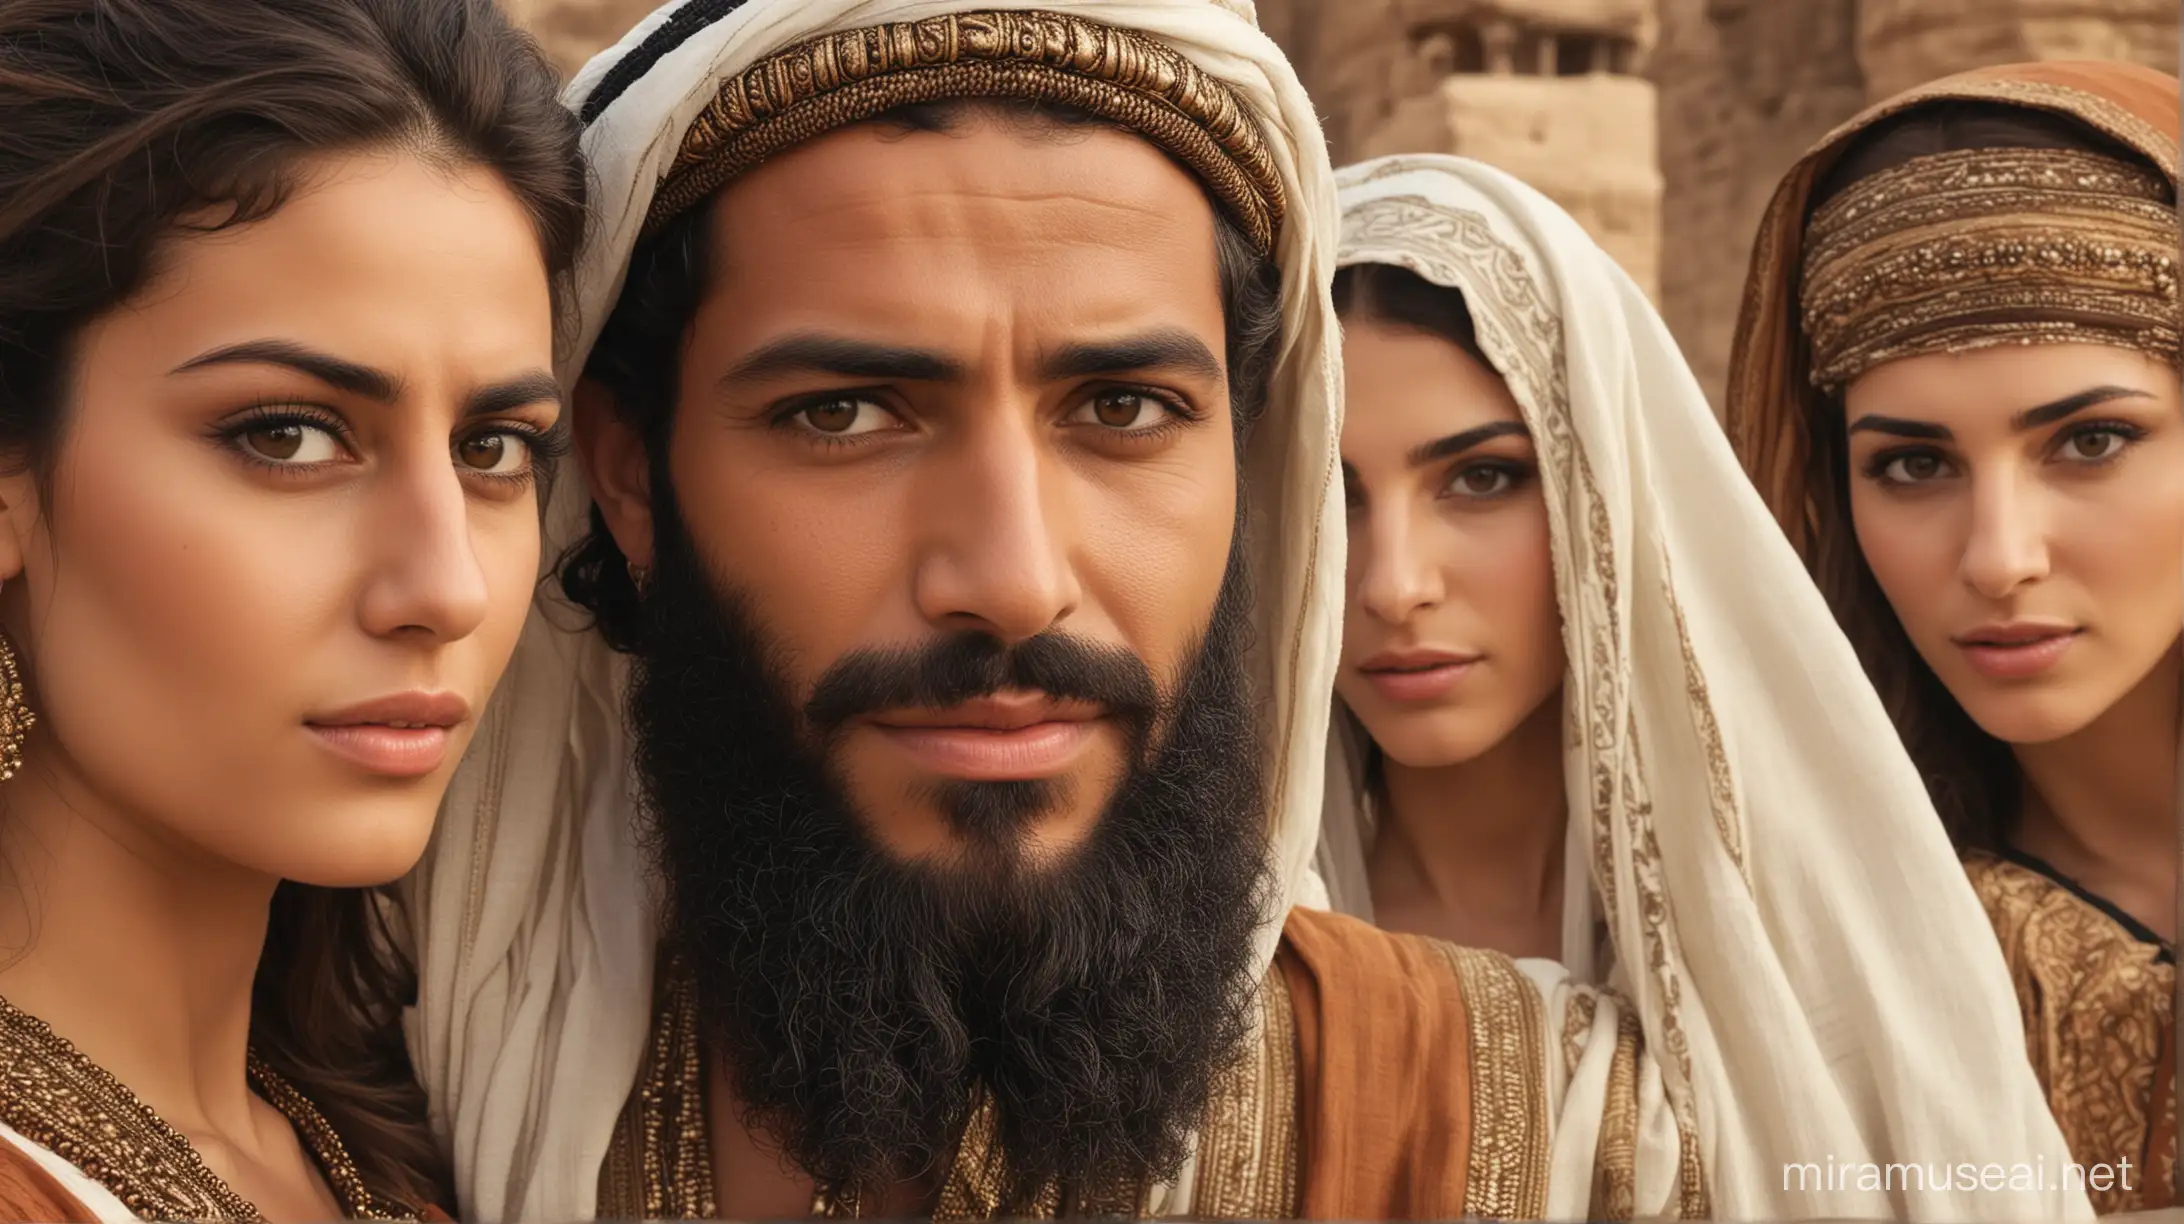 CloseUp Portrait of Middle Eastern Man with Two Beautiful Women in Ancient Moses Era